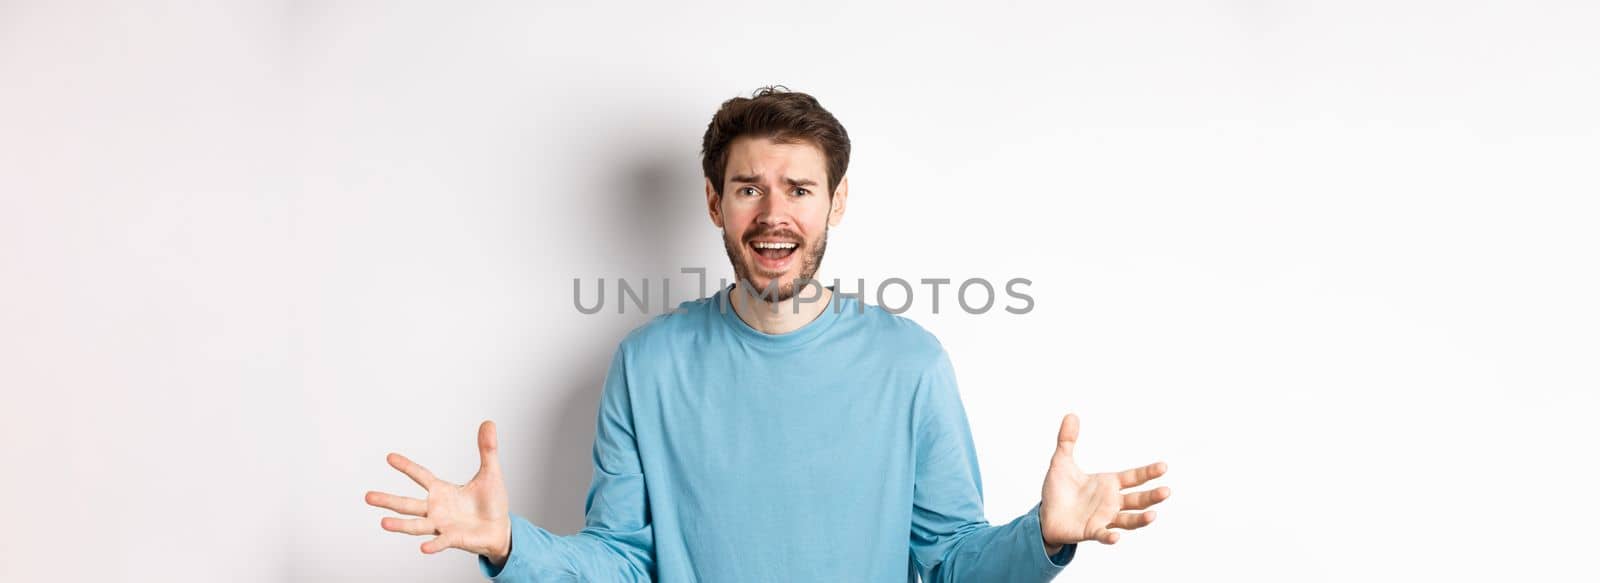 Image of frustrated and worried young man shaking hands, trying to explain something, standing anxious against white background.